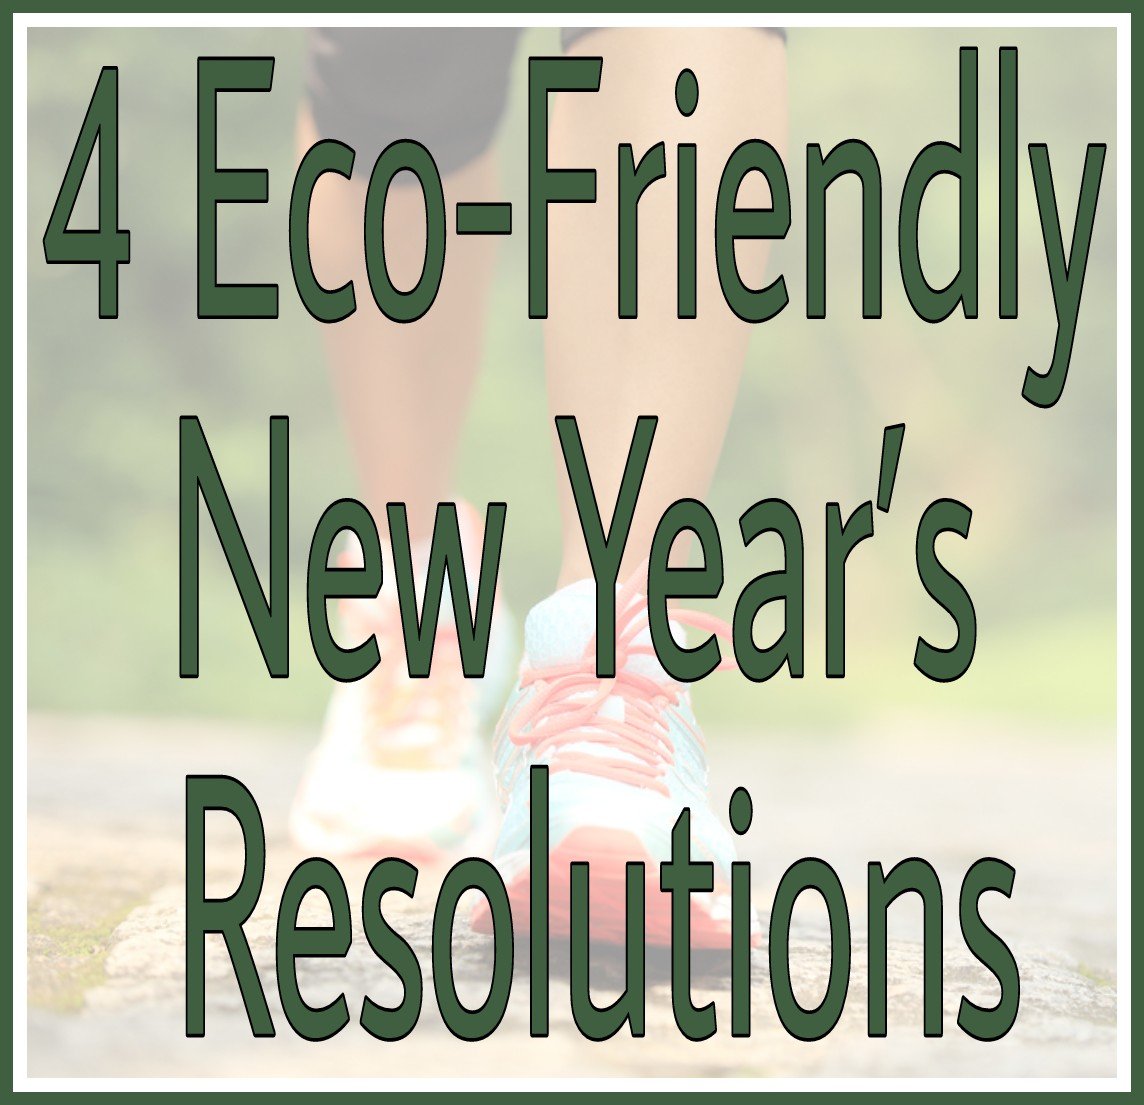 Title 4 Eco-Friendly New Year’s Resolutions with faded background image of jogger outdoors